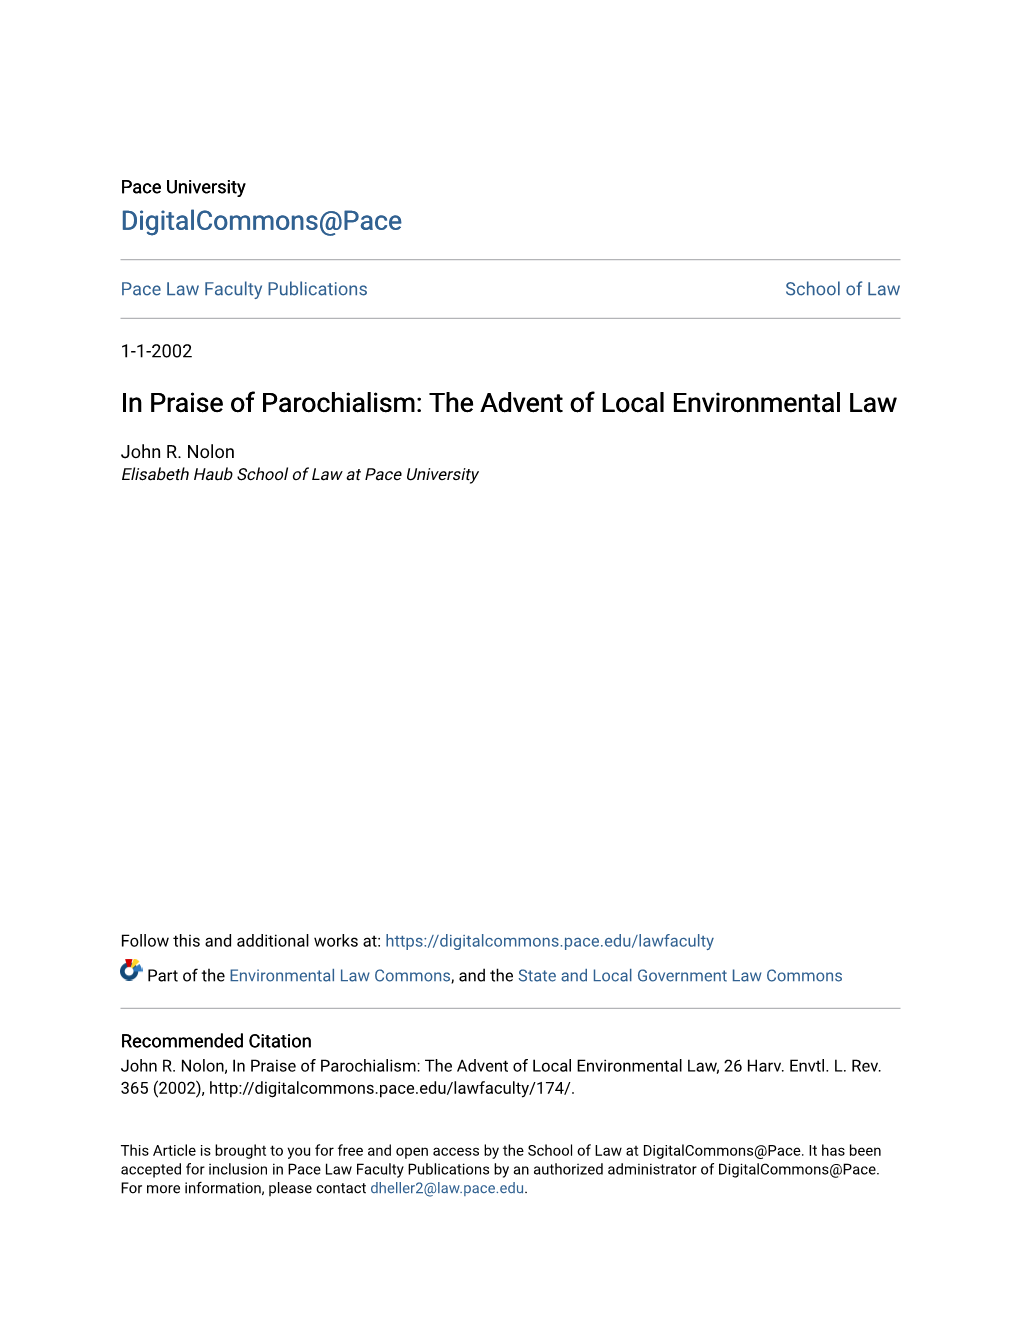 In Praise of Parochialism: the Advent of Local Environmental Law